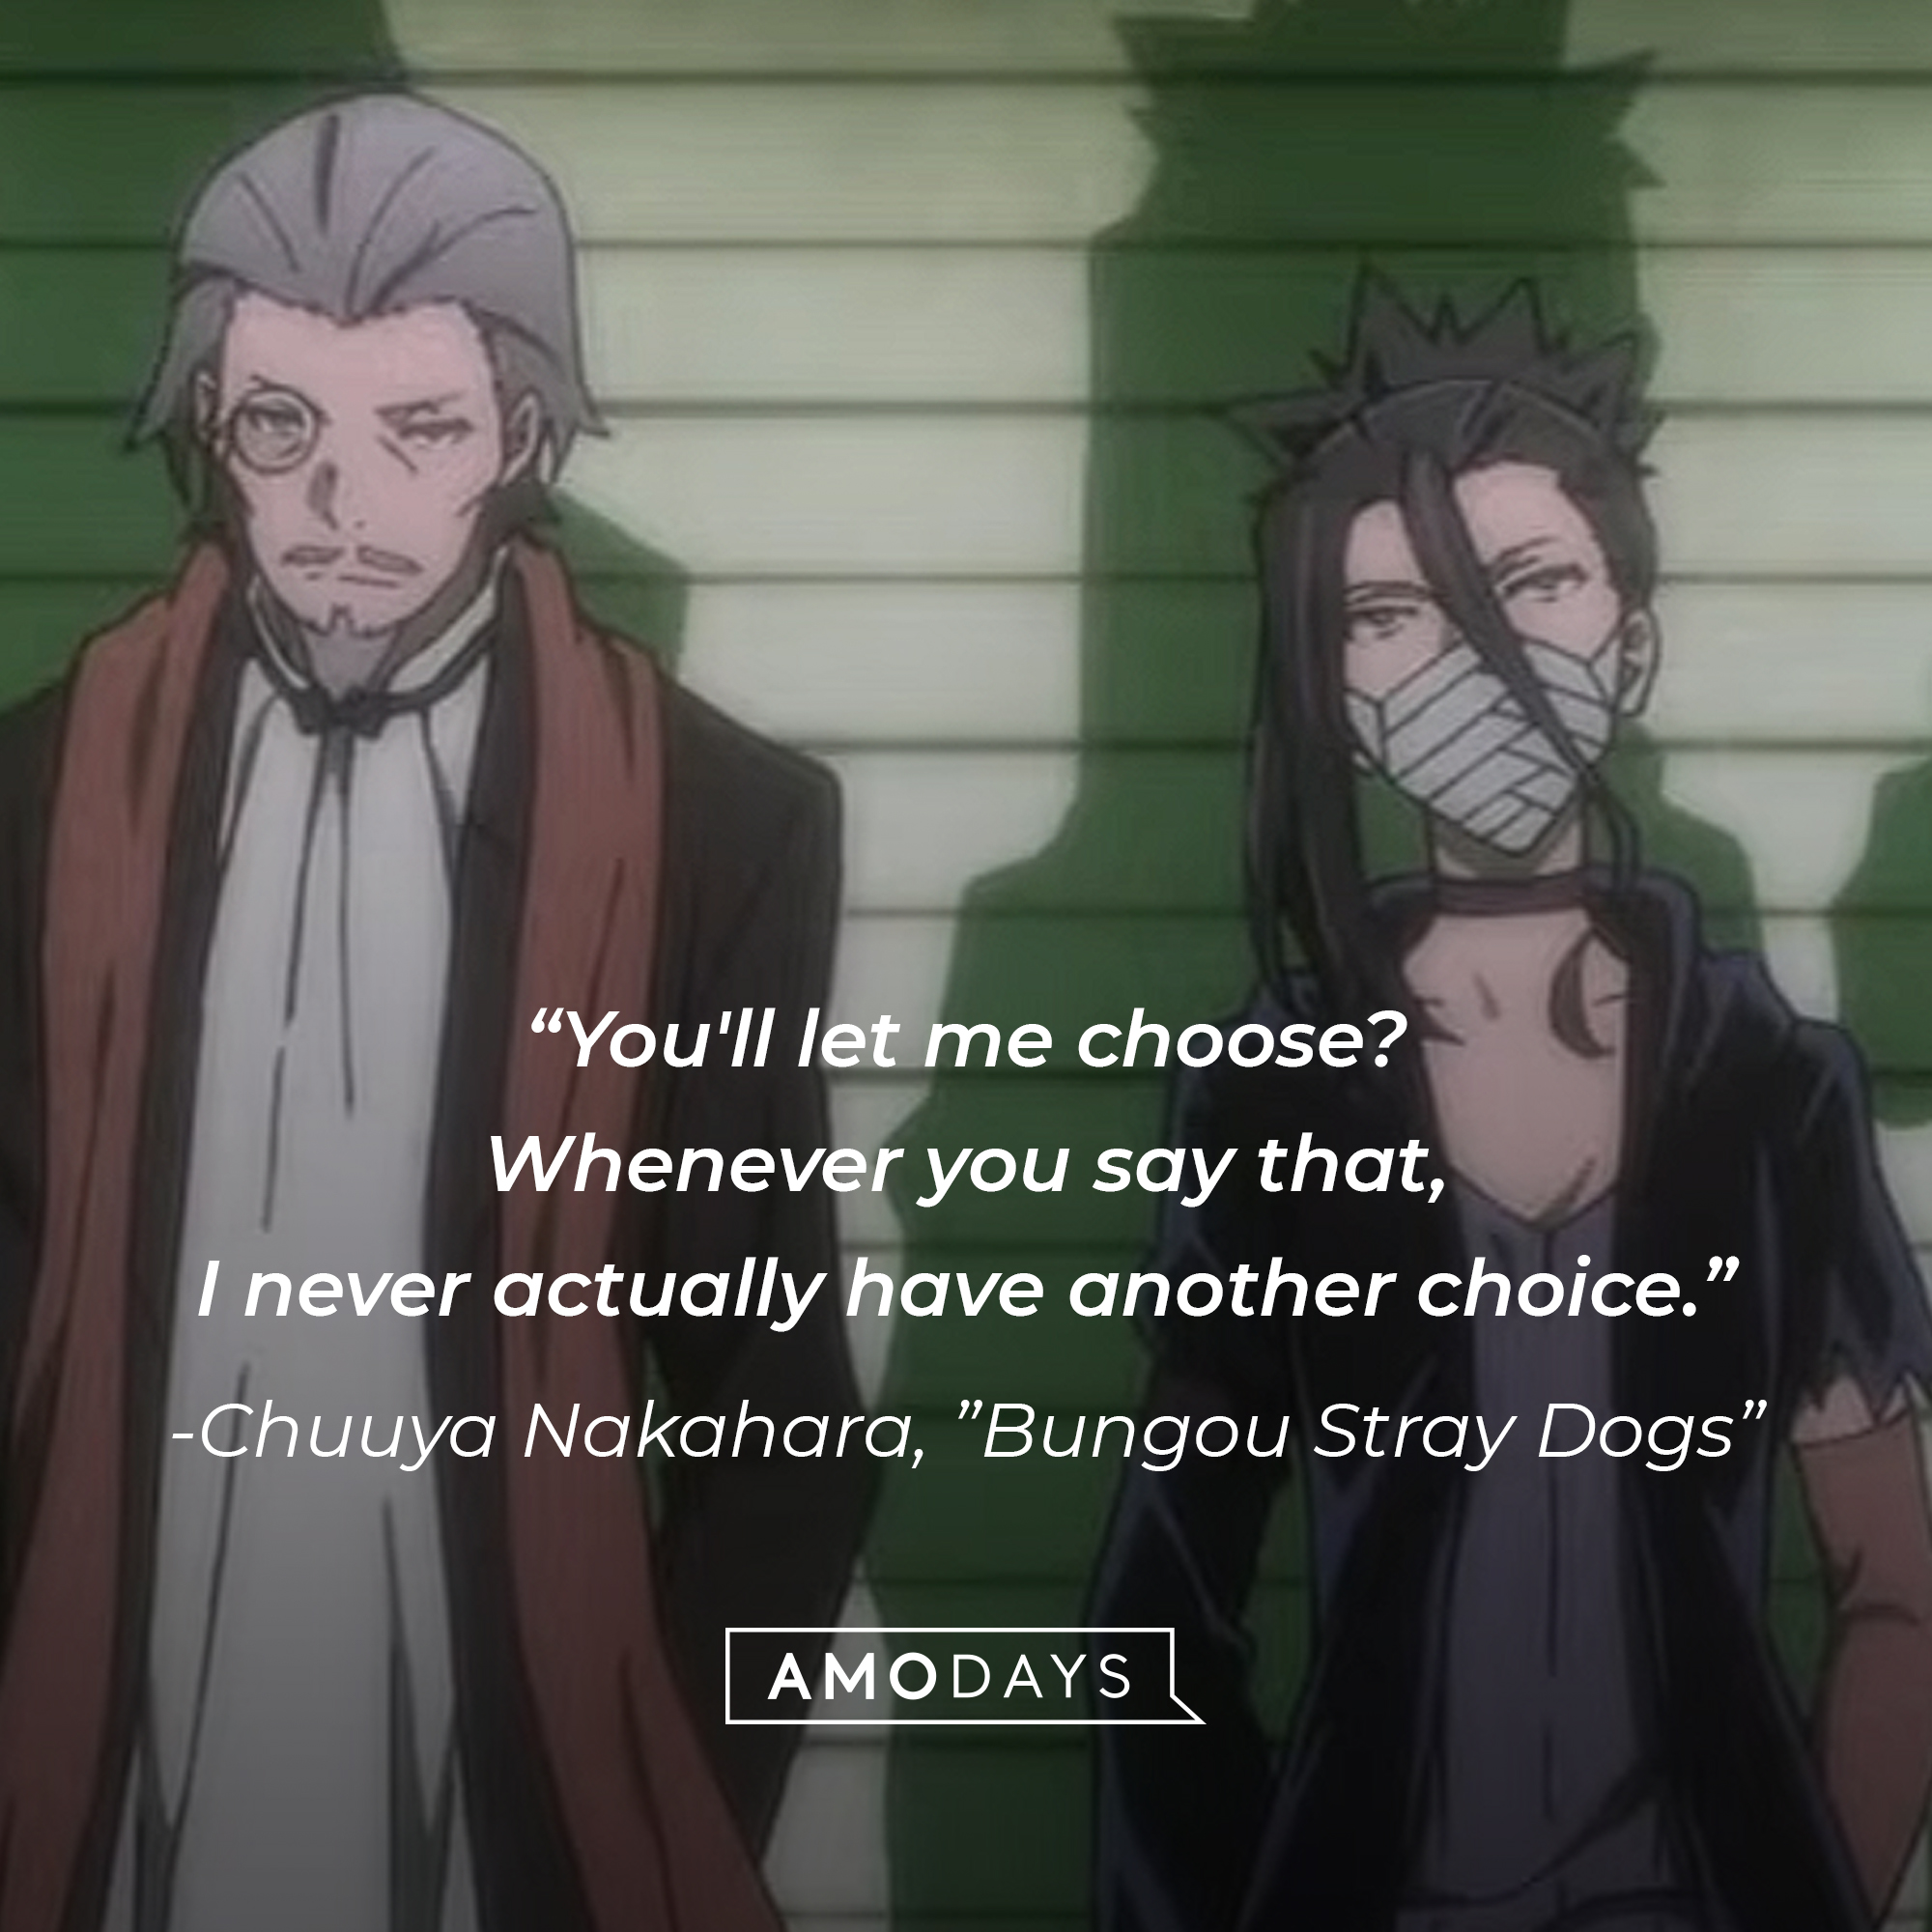 Chuuya Nakahara's quote: "You'll let me choose? Whenever you say that, I never actually have another choice.” | Image: youtube.com/Crunchyroll Collection